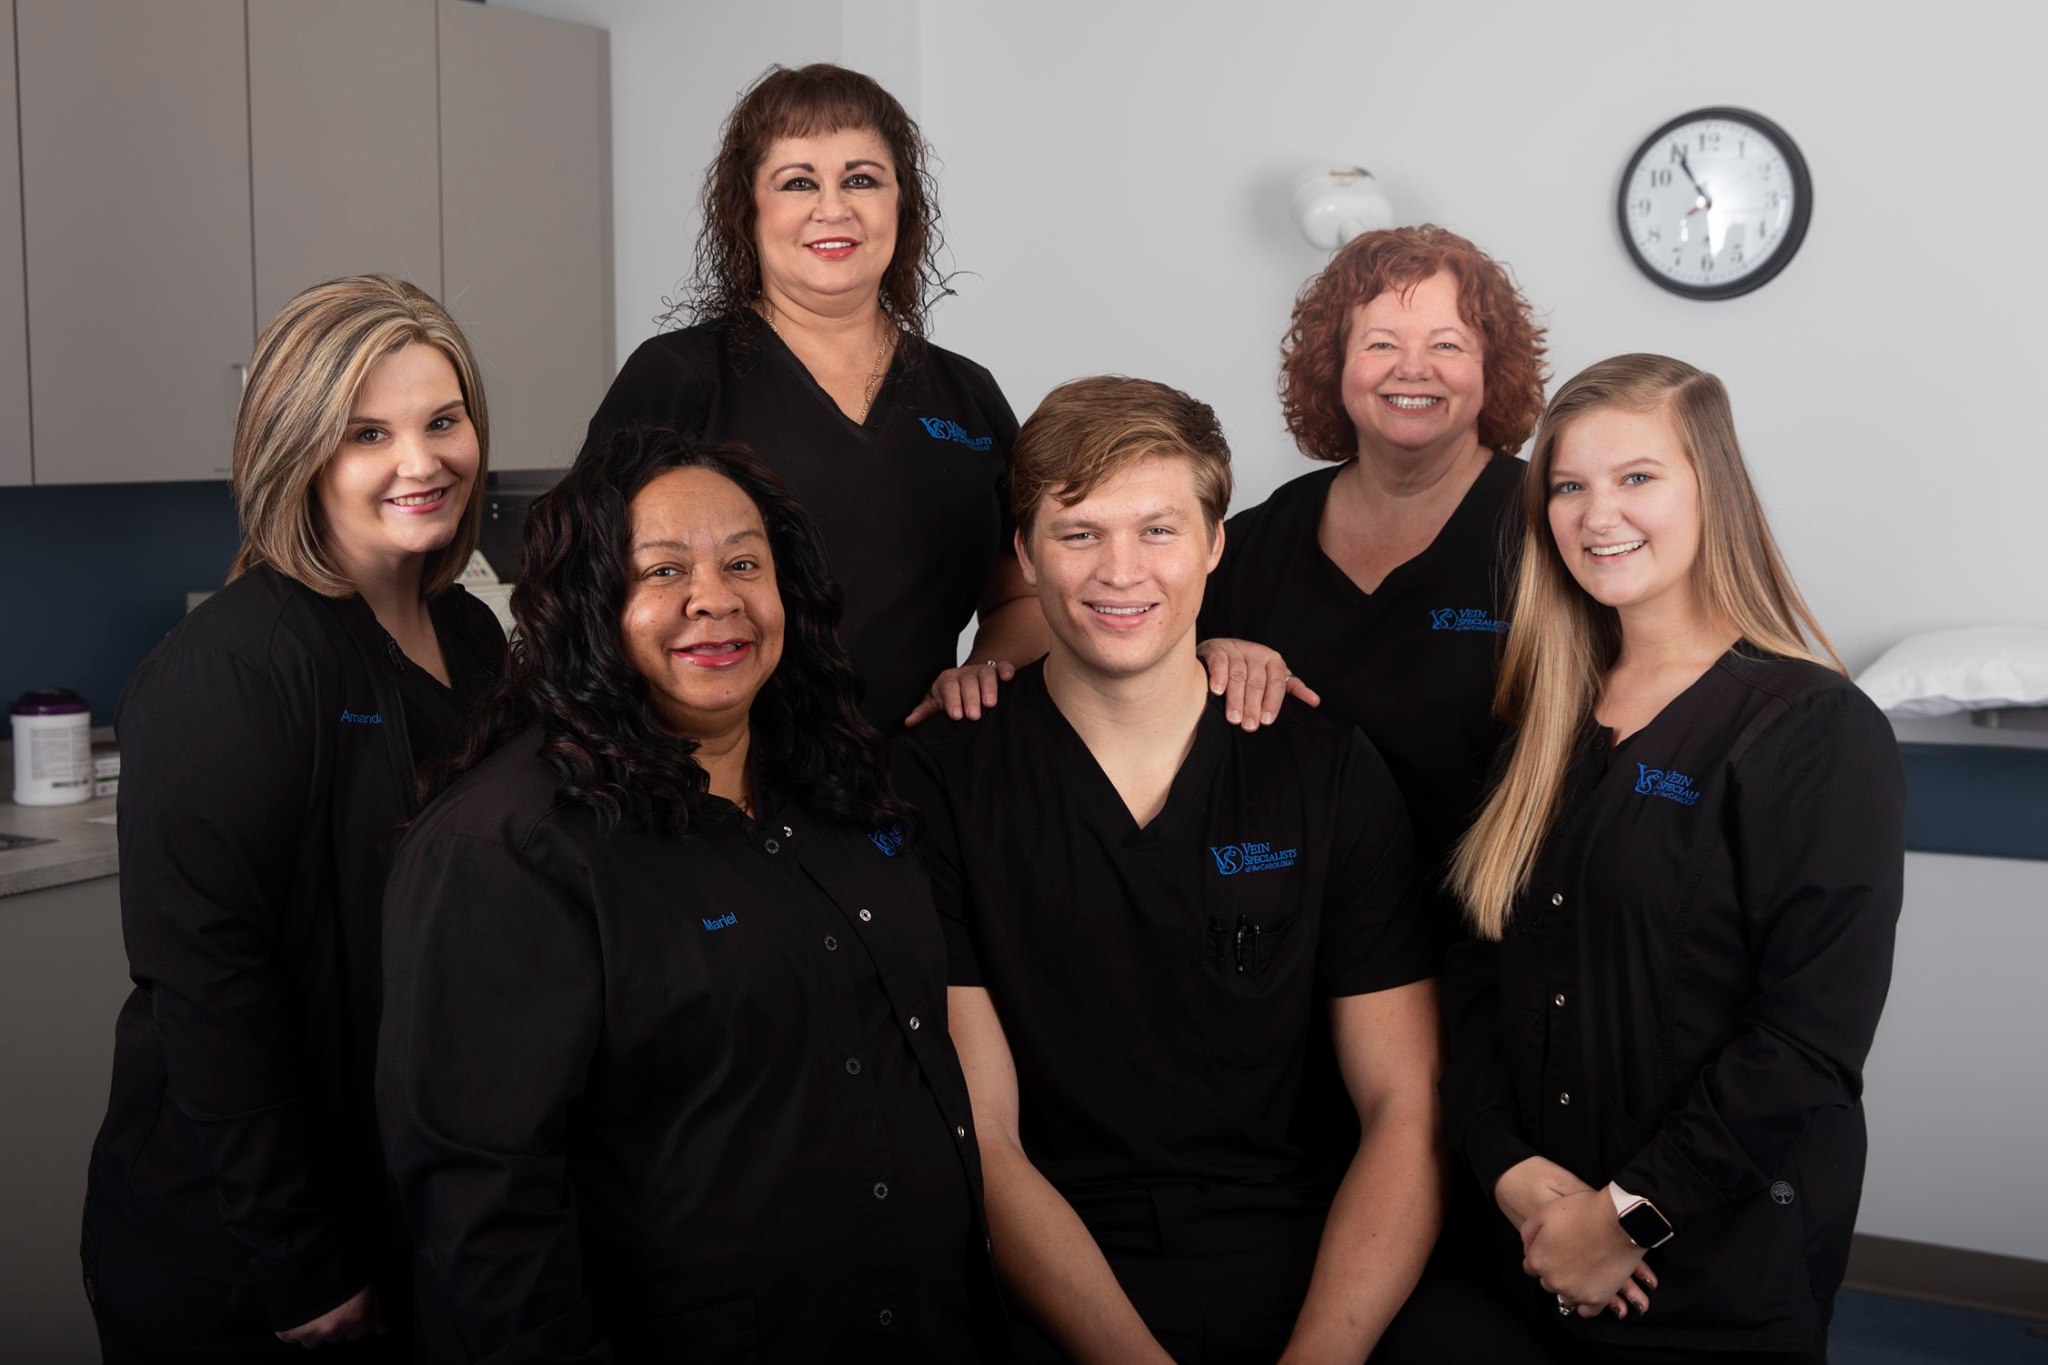 Meet our amazing team of Medical Assistants